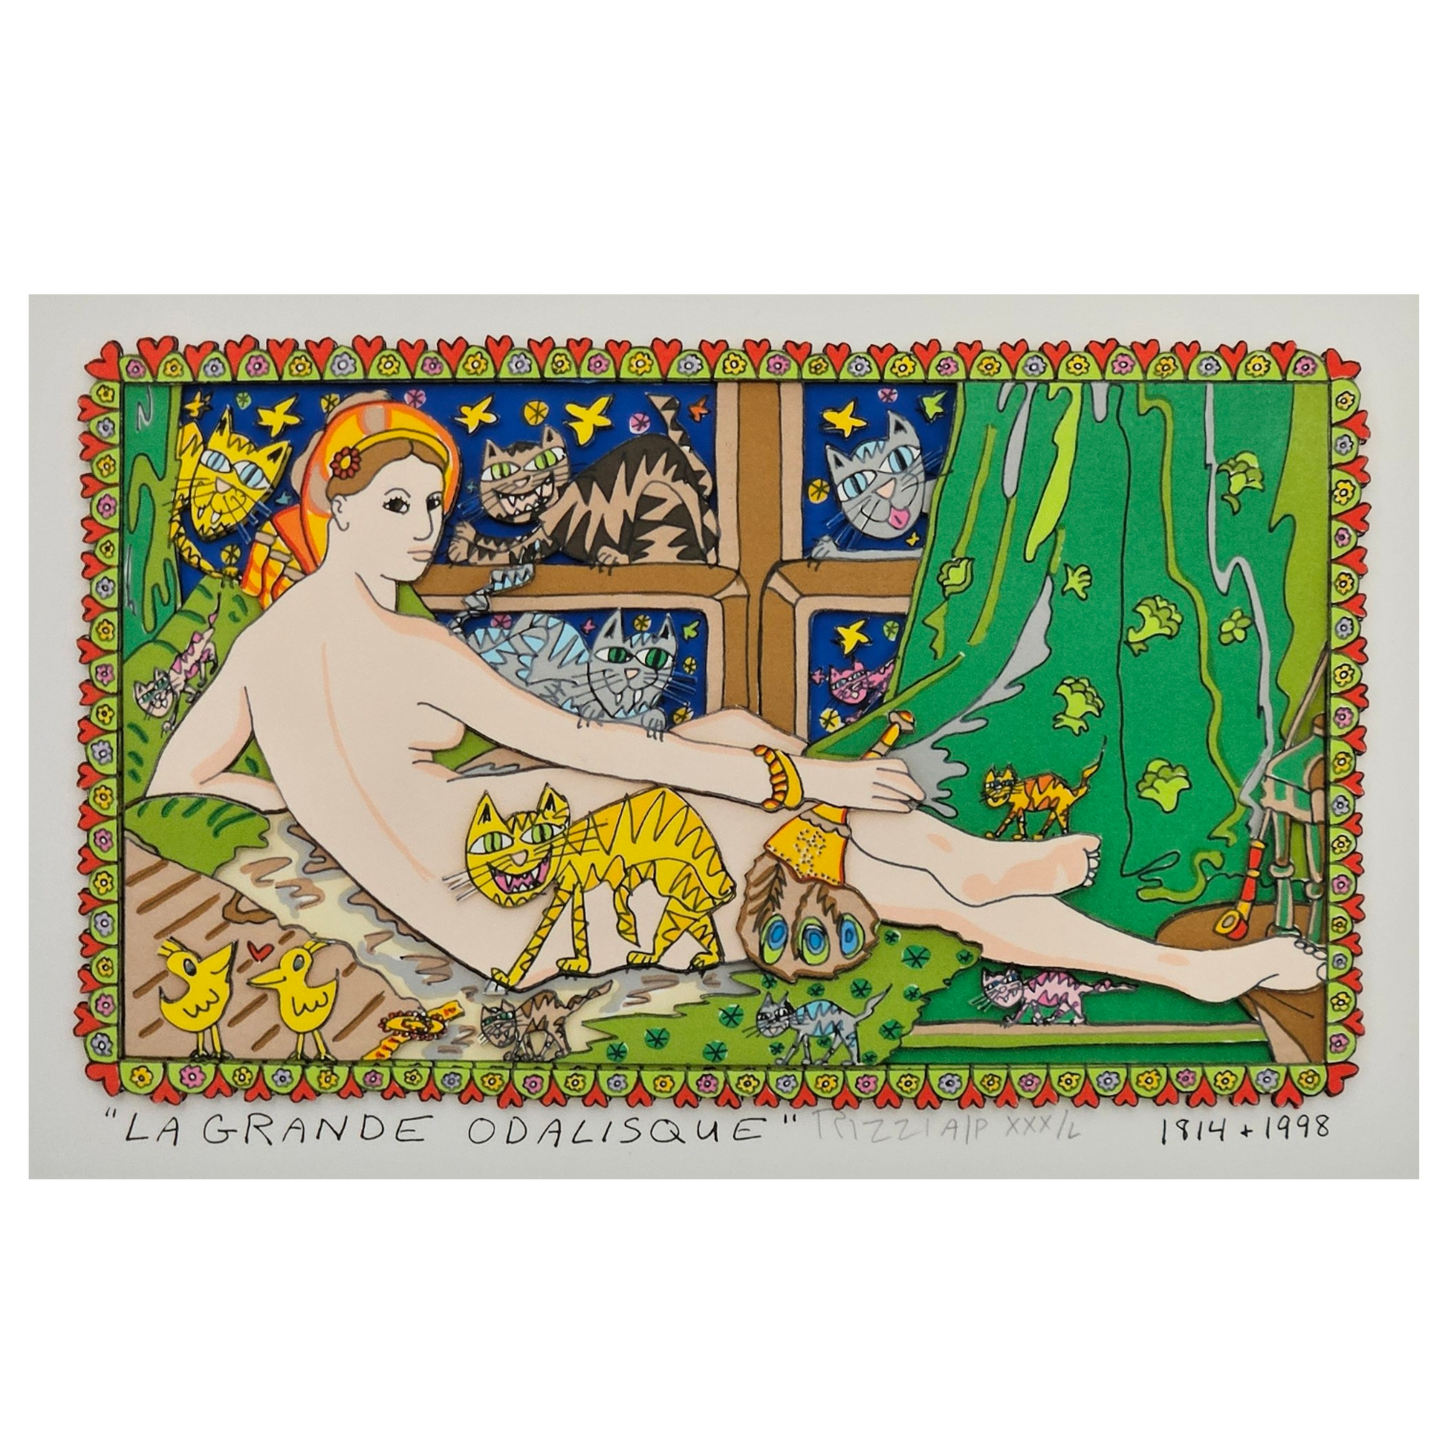 James Rizzi - The Great Odalisque (1998)